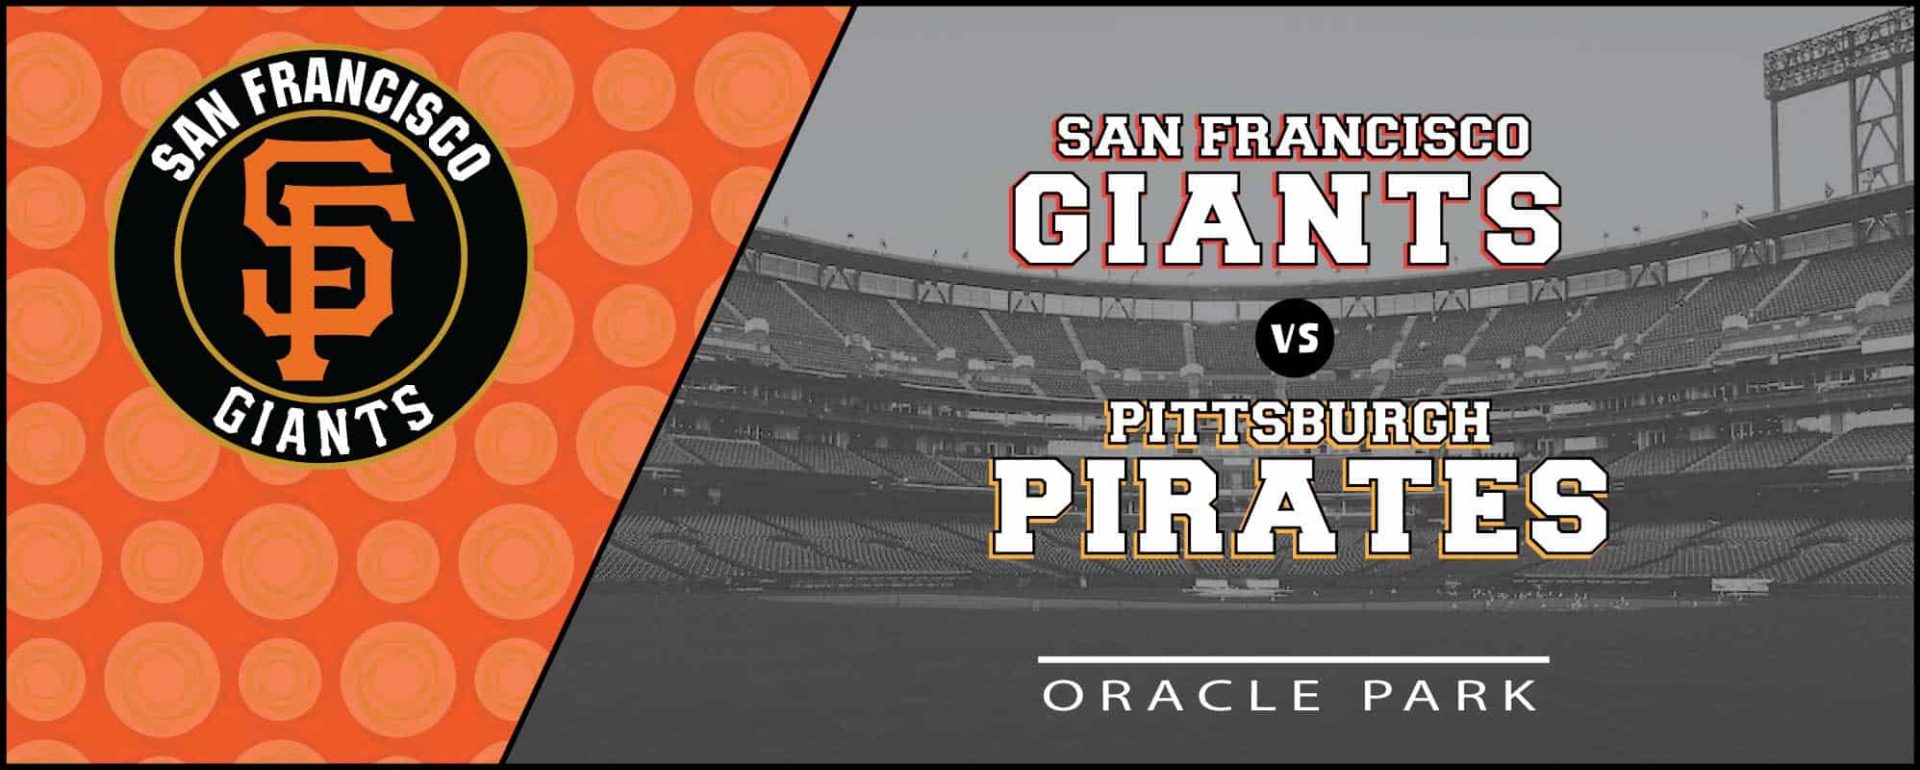 Giants vs. Pirates at Oracle Park